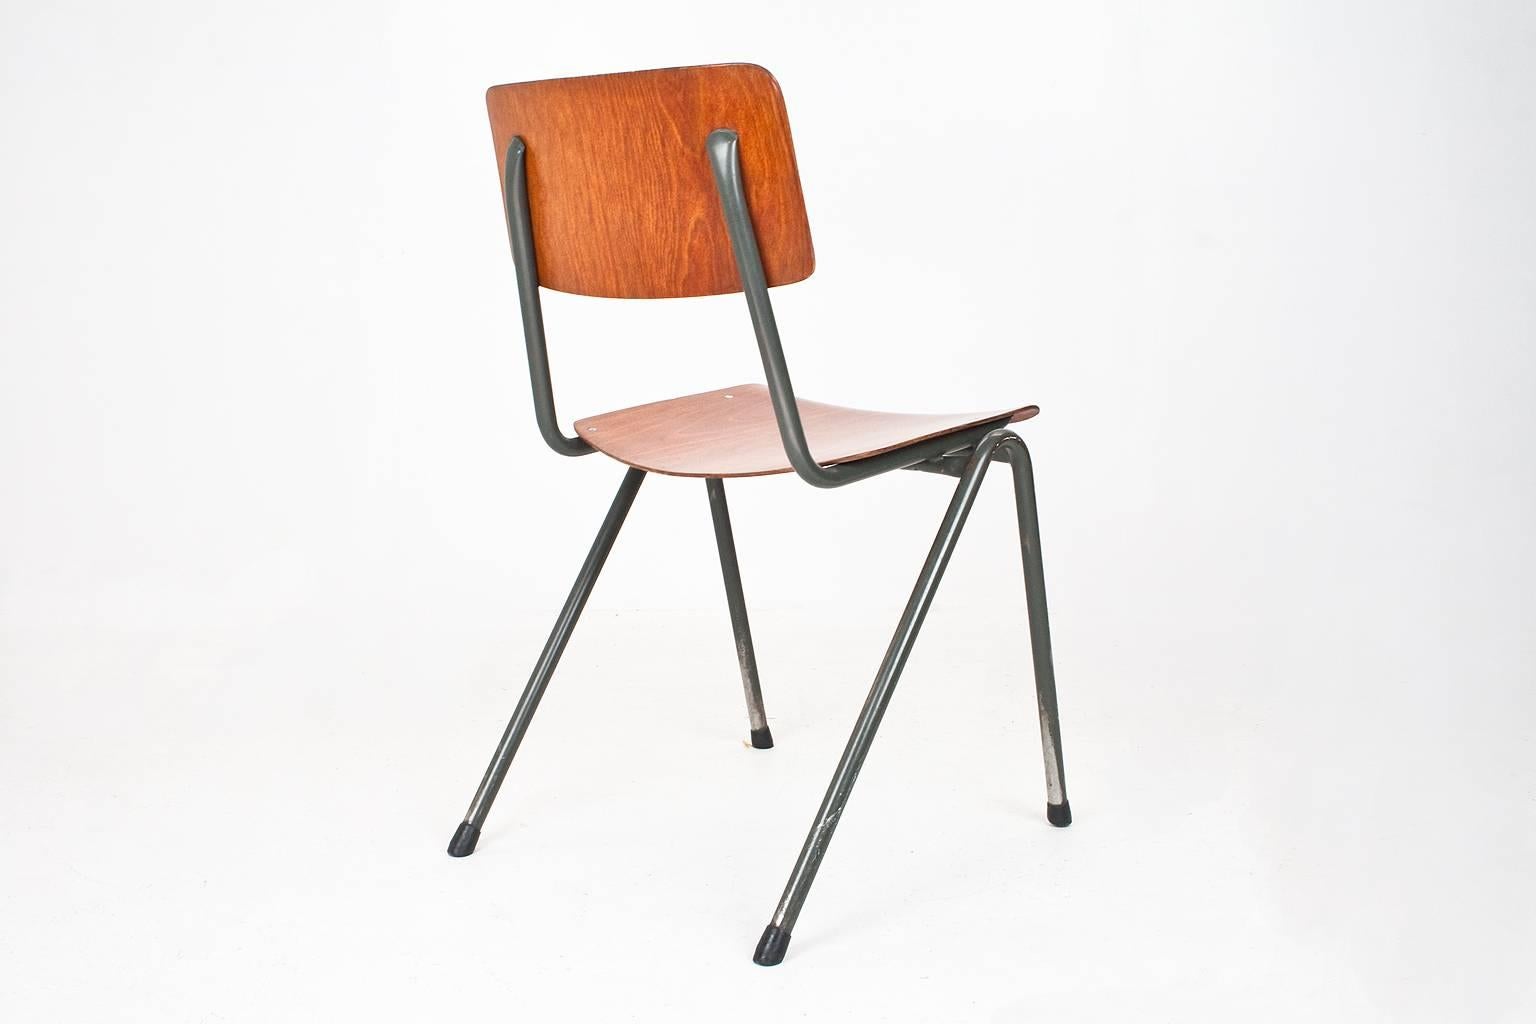 Industrial stock of Marko Holland brown school chairs 1970s, with grey metal frame and mid brown laminated wooden seating in good condition.

Light patina on the frame. Seats are stackable.

For specific shipping request on your order, send us